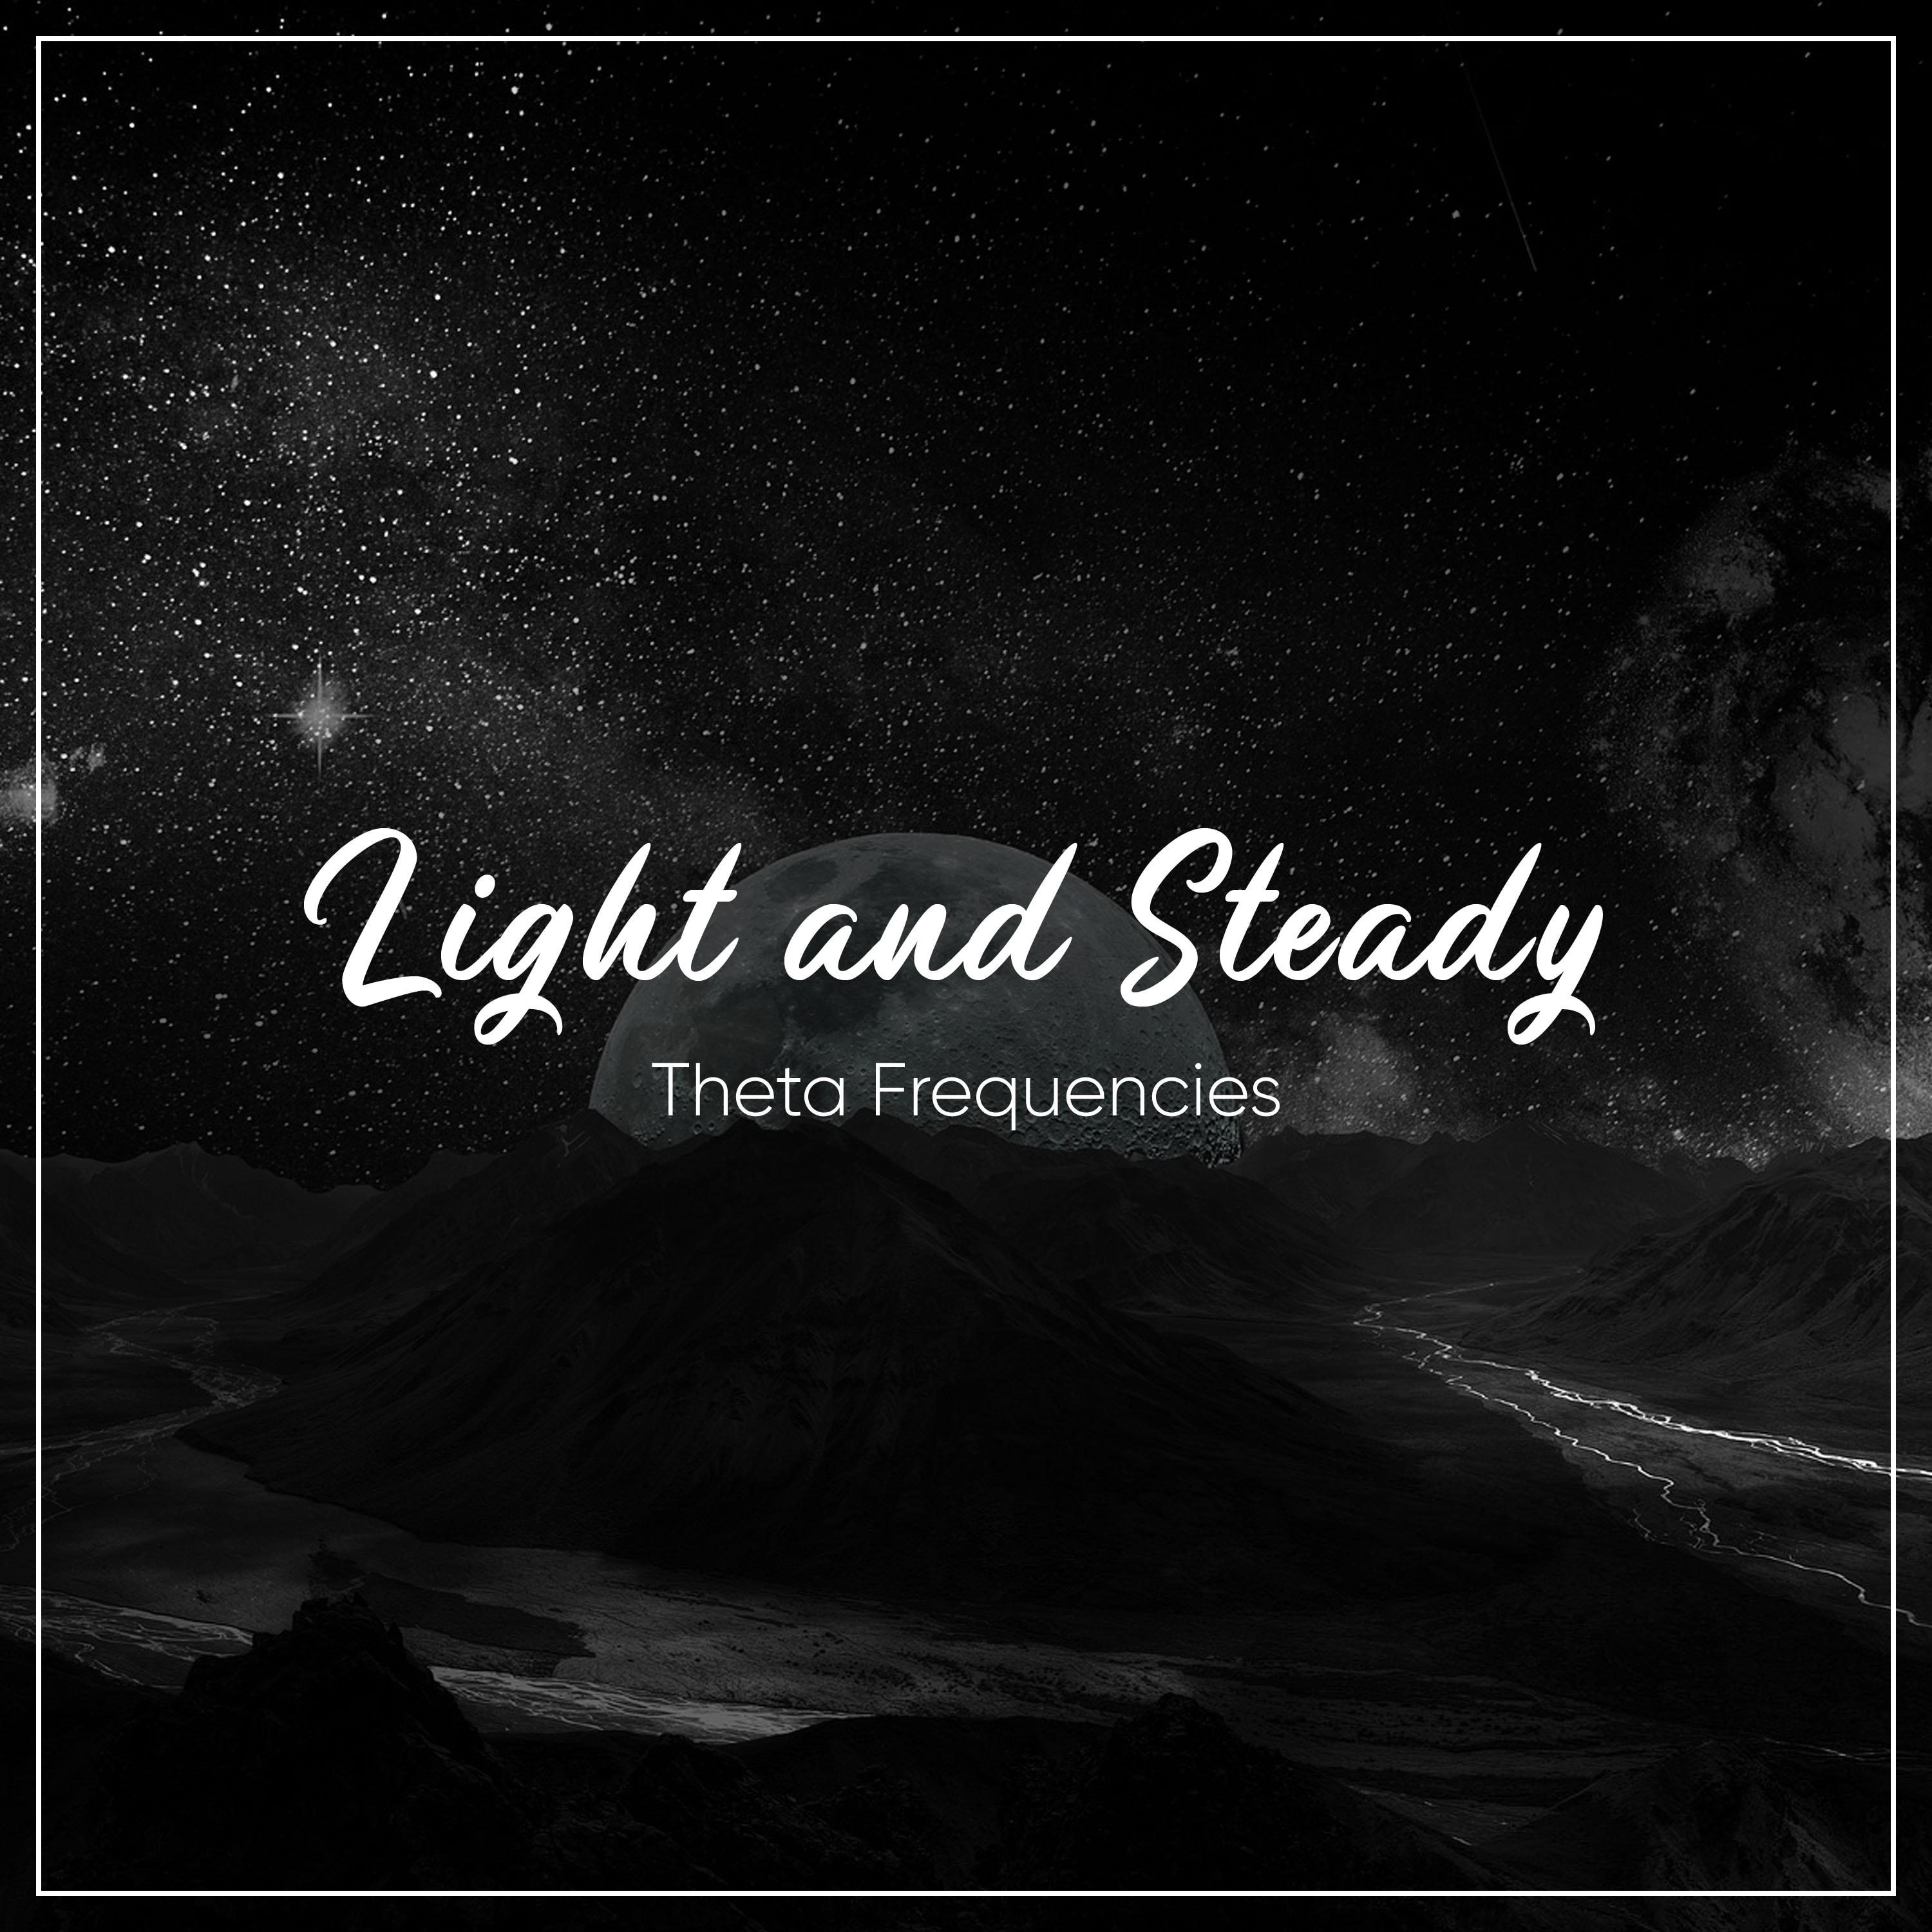 #13 Light and Steady Theta Frequencies